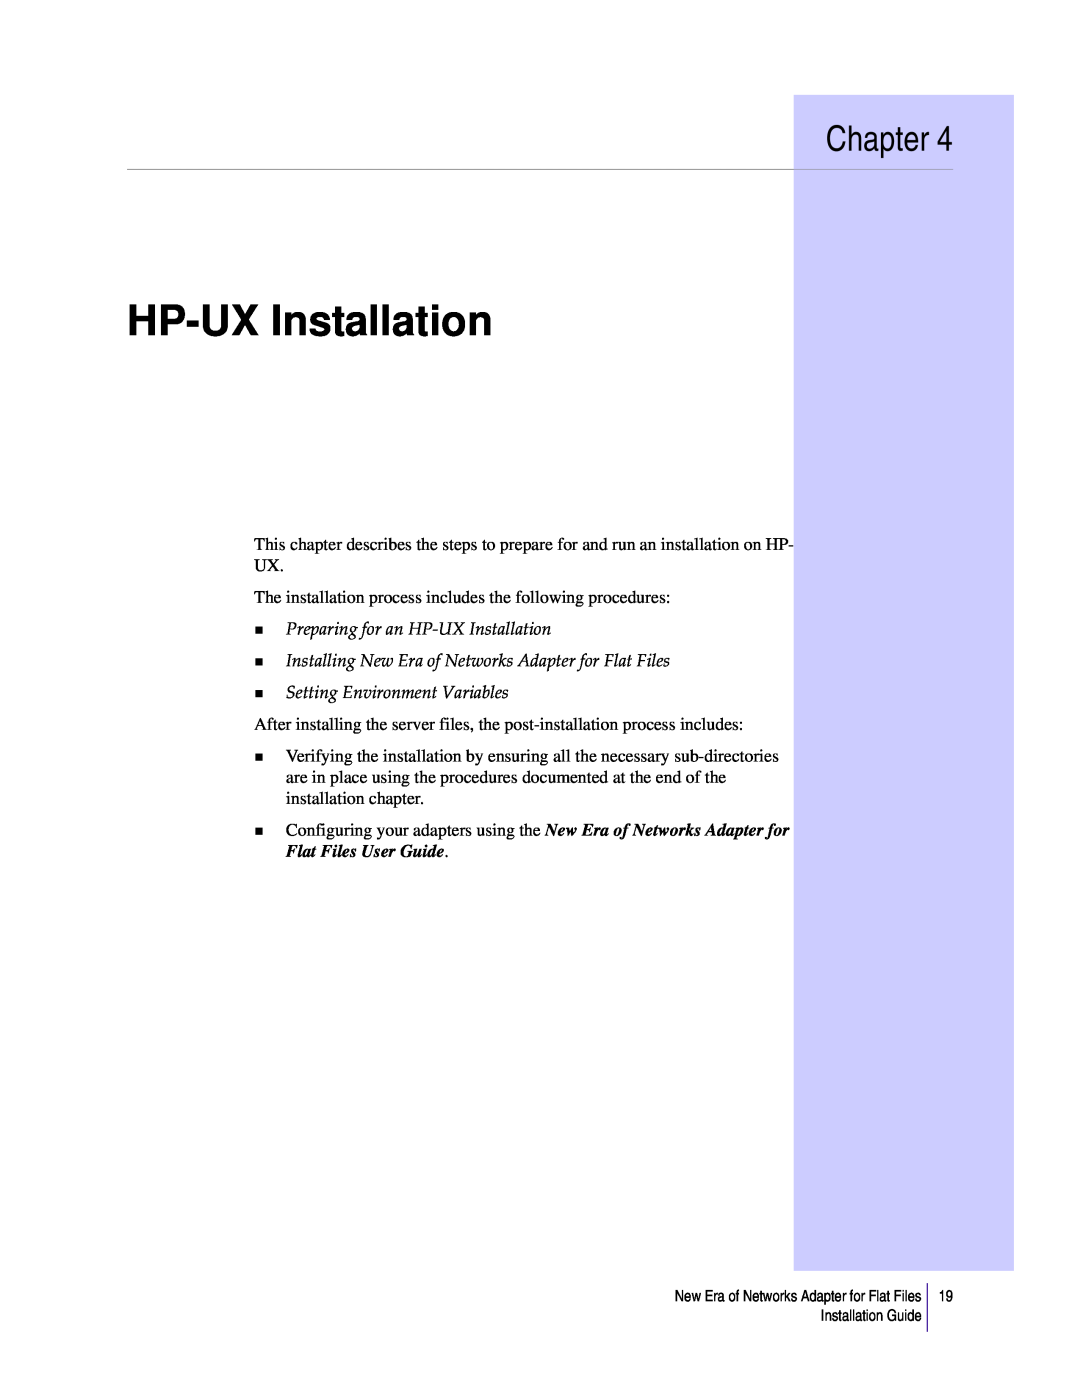 Sybase 3.8 manual Preparing for an HP-UX Installation, Chapter, Installing New Era of Networks Adapter for Flat Files 